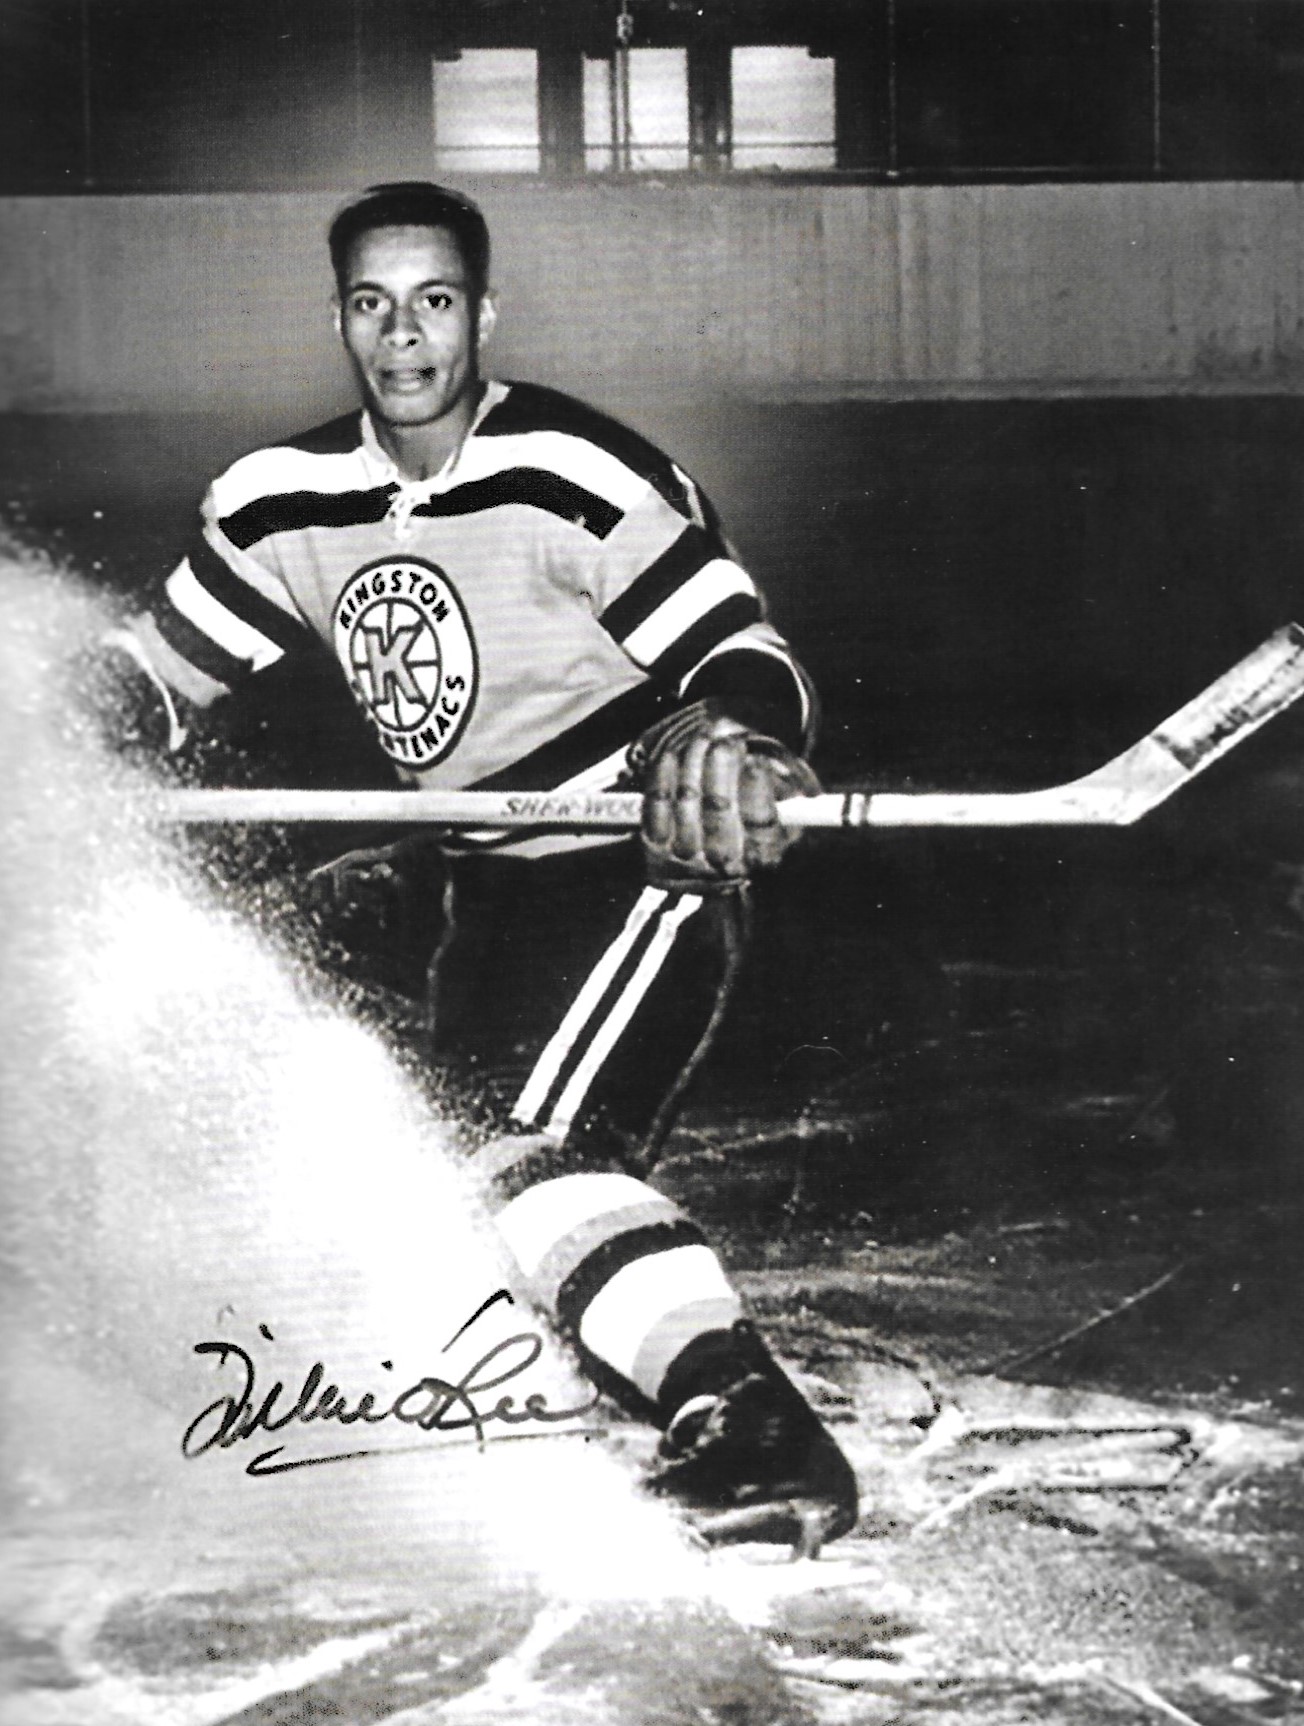 10 Things You May Not Know About Willie O'Ree